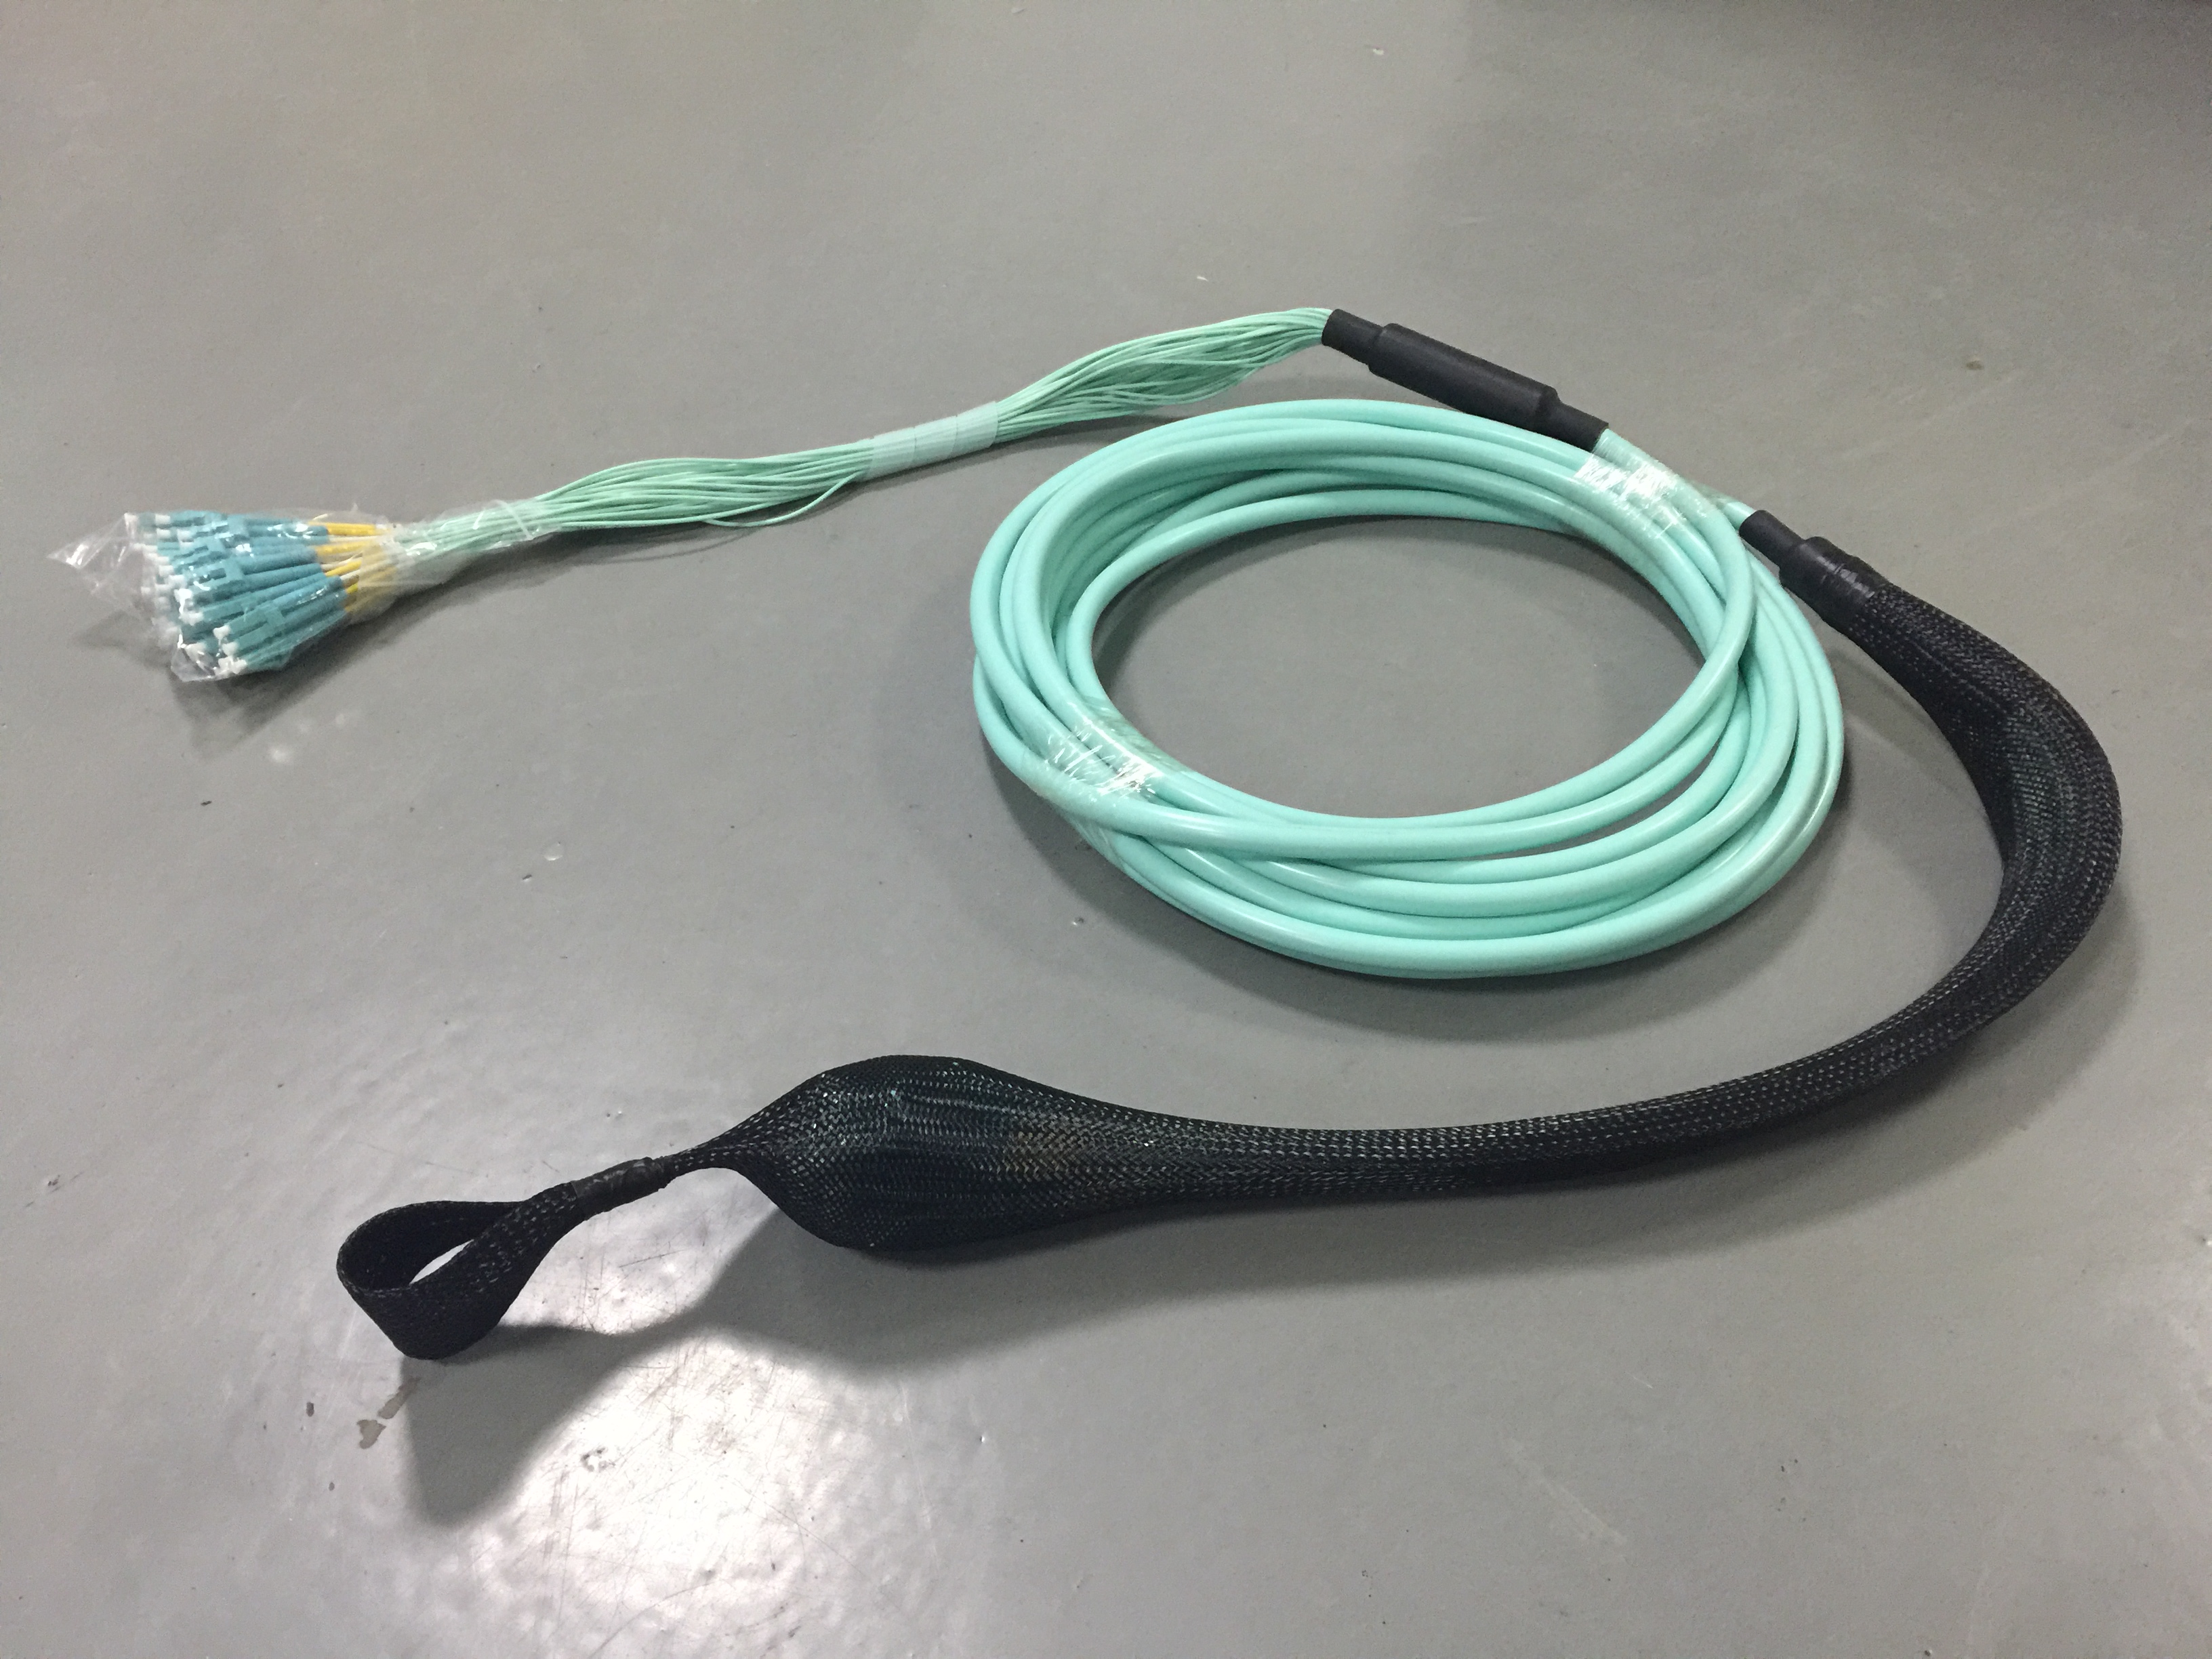 How to make quality fiber optic patch cord